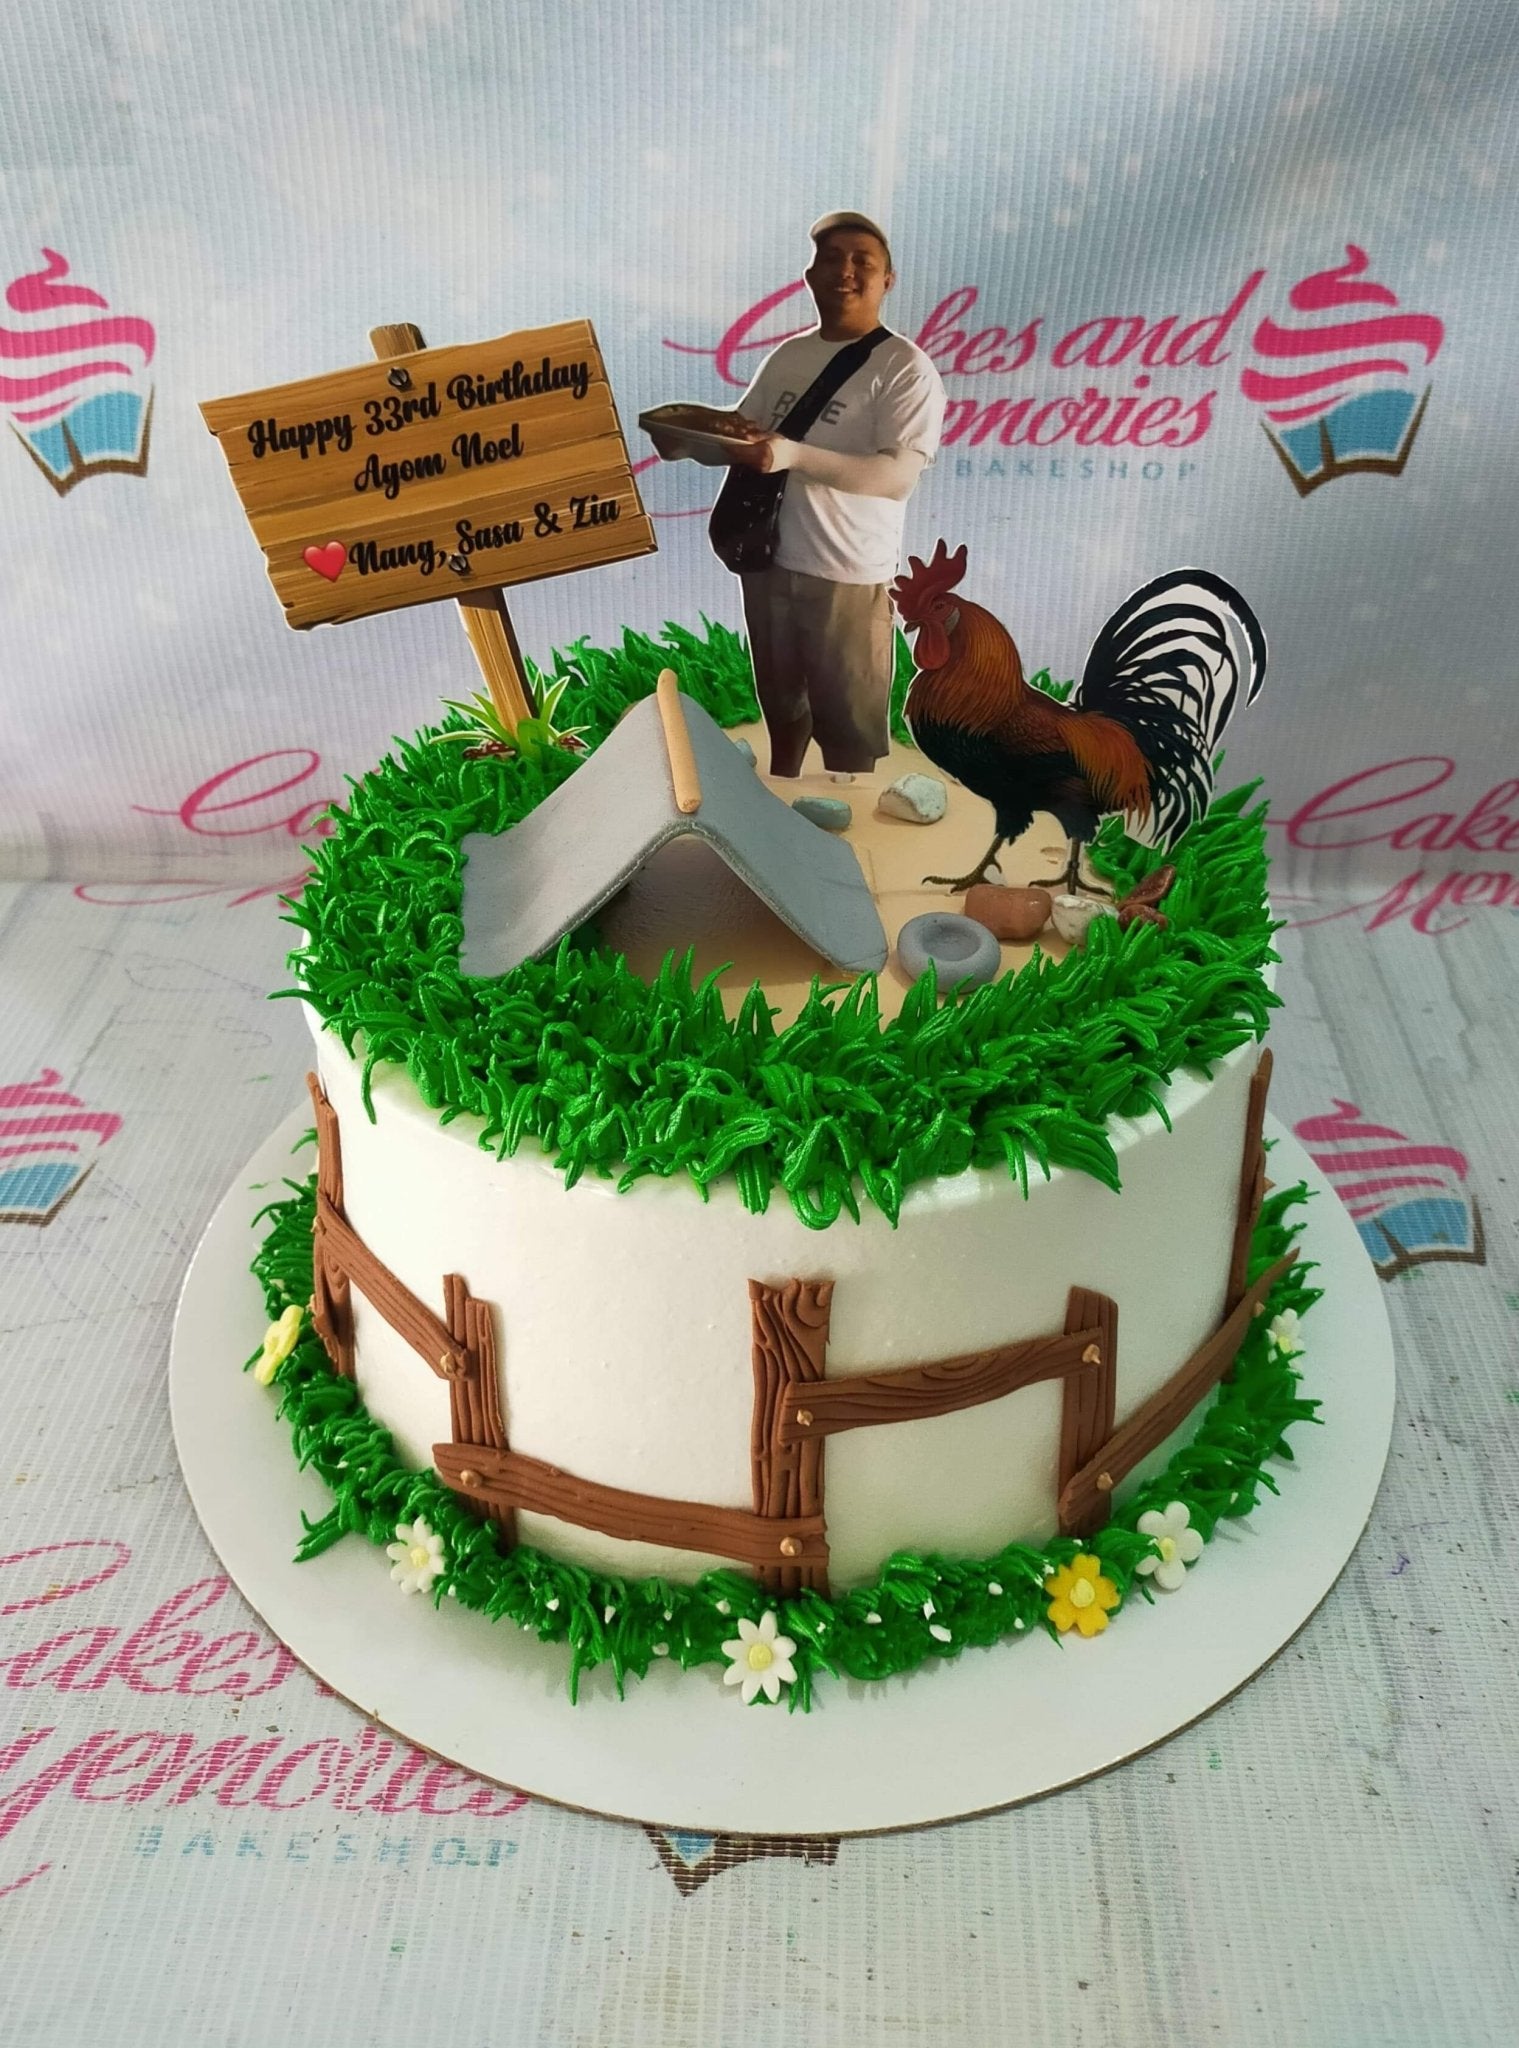 Rooster Cakes And Memories Bakeshop